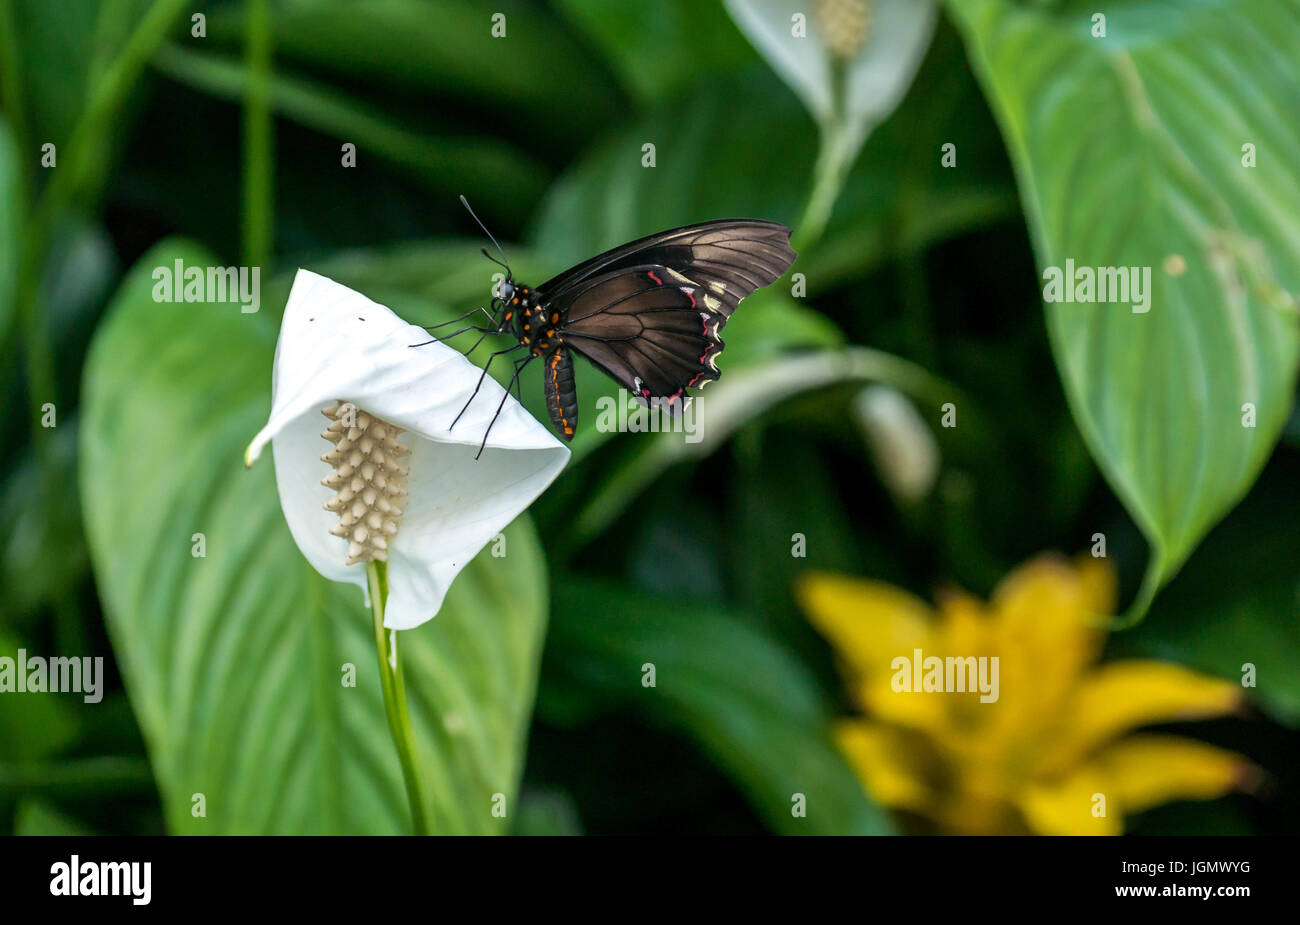 Tropical Polydamas swallowtail butterfly, Battus polydamas, on white peace lily, Spathiphyllum Stock Photo